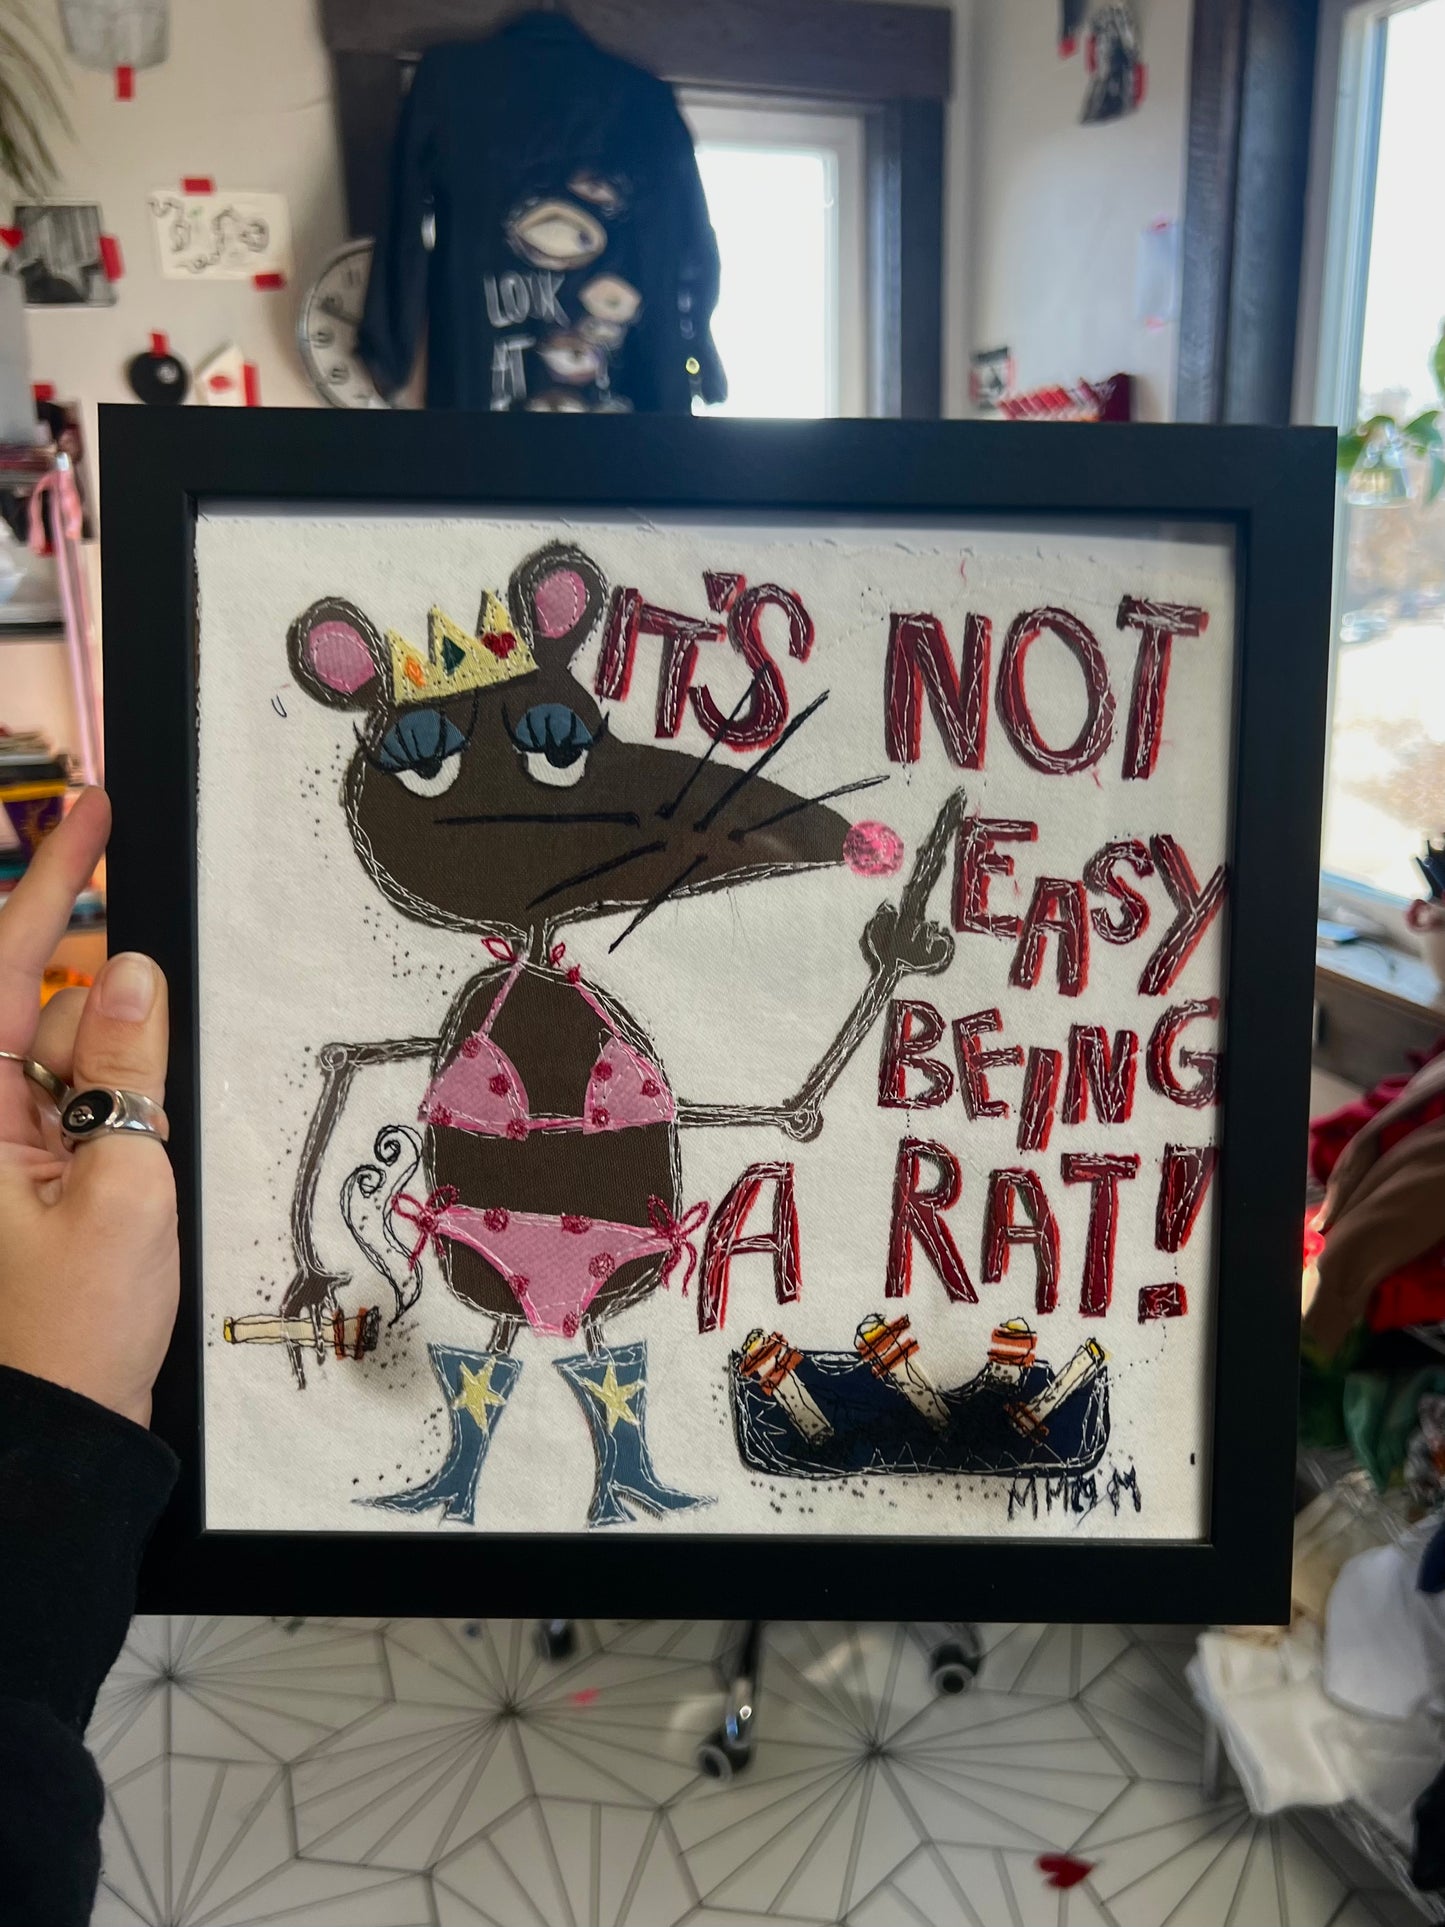 It’s NOT easy being a rat wall hanging(10x10)